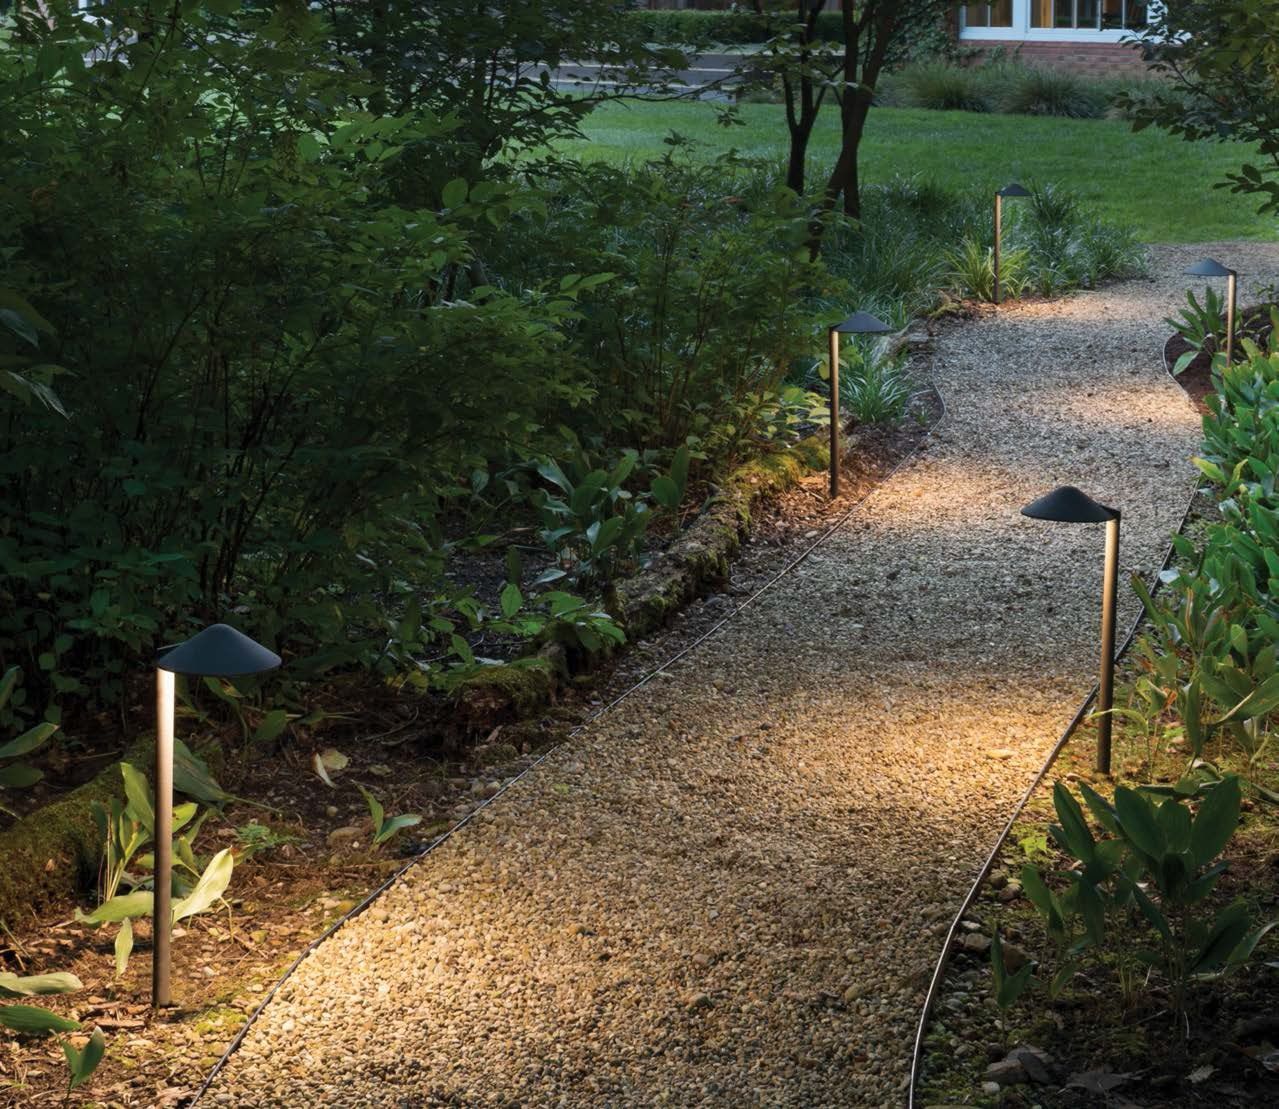 Expert Guide to Exterior LED Lighting: Making An Informed Choice